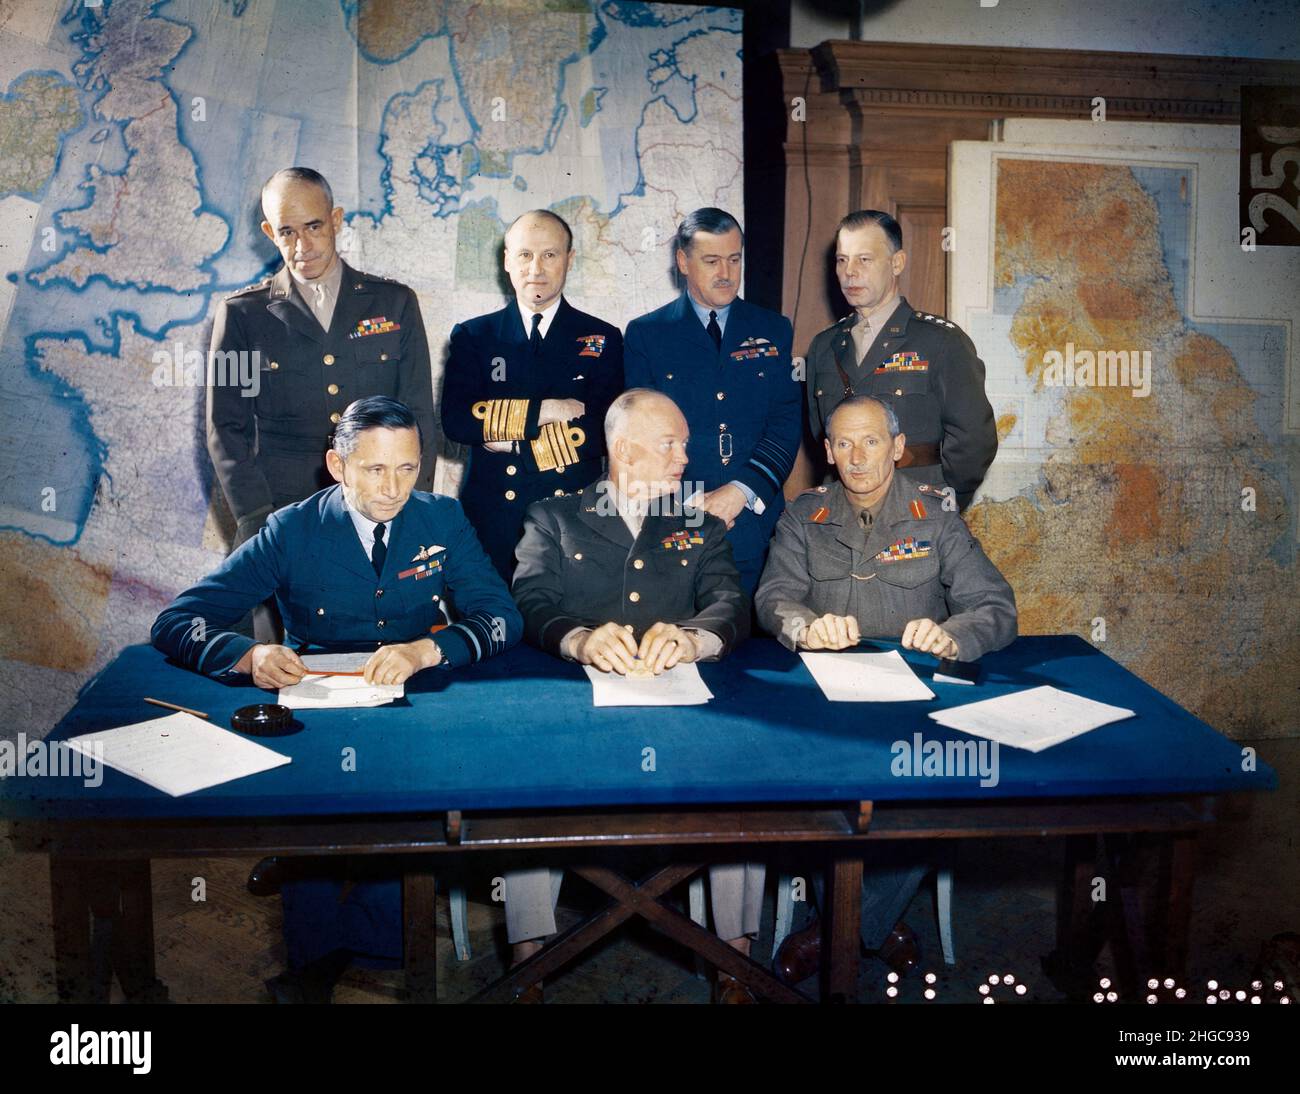 General Dwight D. Eisenhower with his Supreme Command staff.  Left to right, seated: Air Chief Marshall Sir Arthur Tedder, General Eisenhower and General Sir Bernard Montgomery.  Left to right, standing: Lieutenant General Omar Bradley, Admiral Sir Bertram Ramsey, Air Chief Marshal Sir Trafford Leigh Mallory and Lieutenant General W. Bedell Smith. Stock Photo